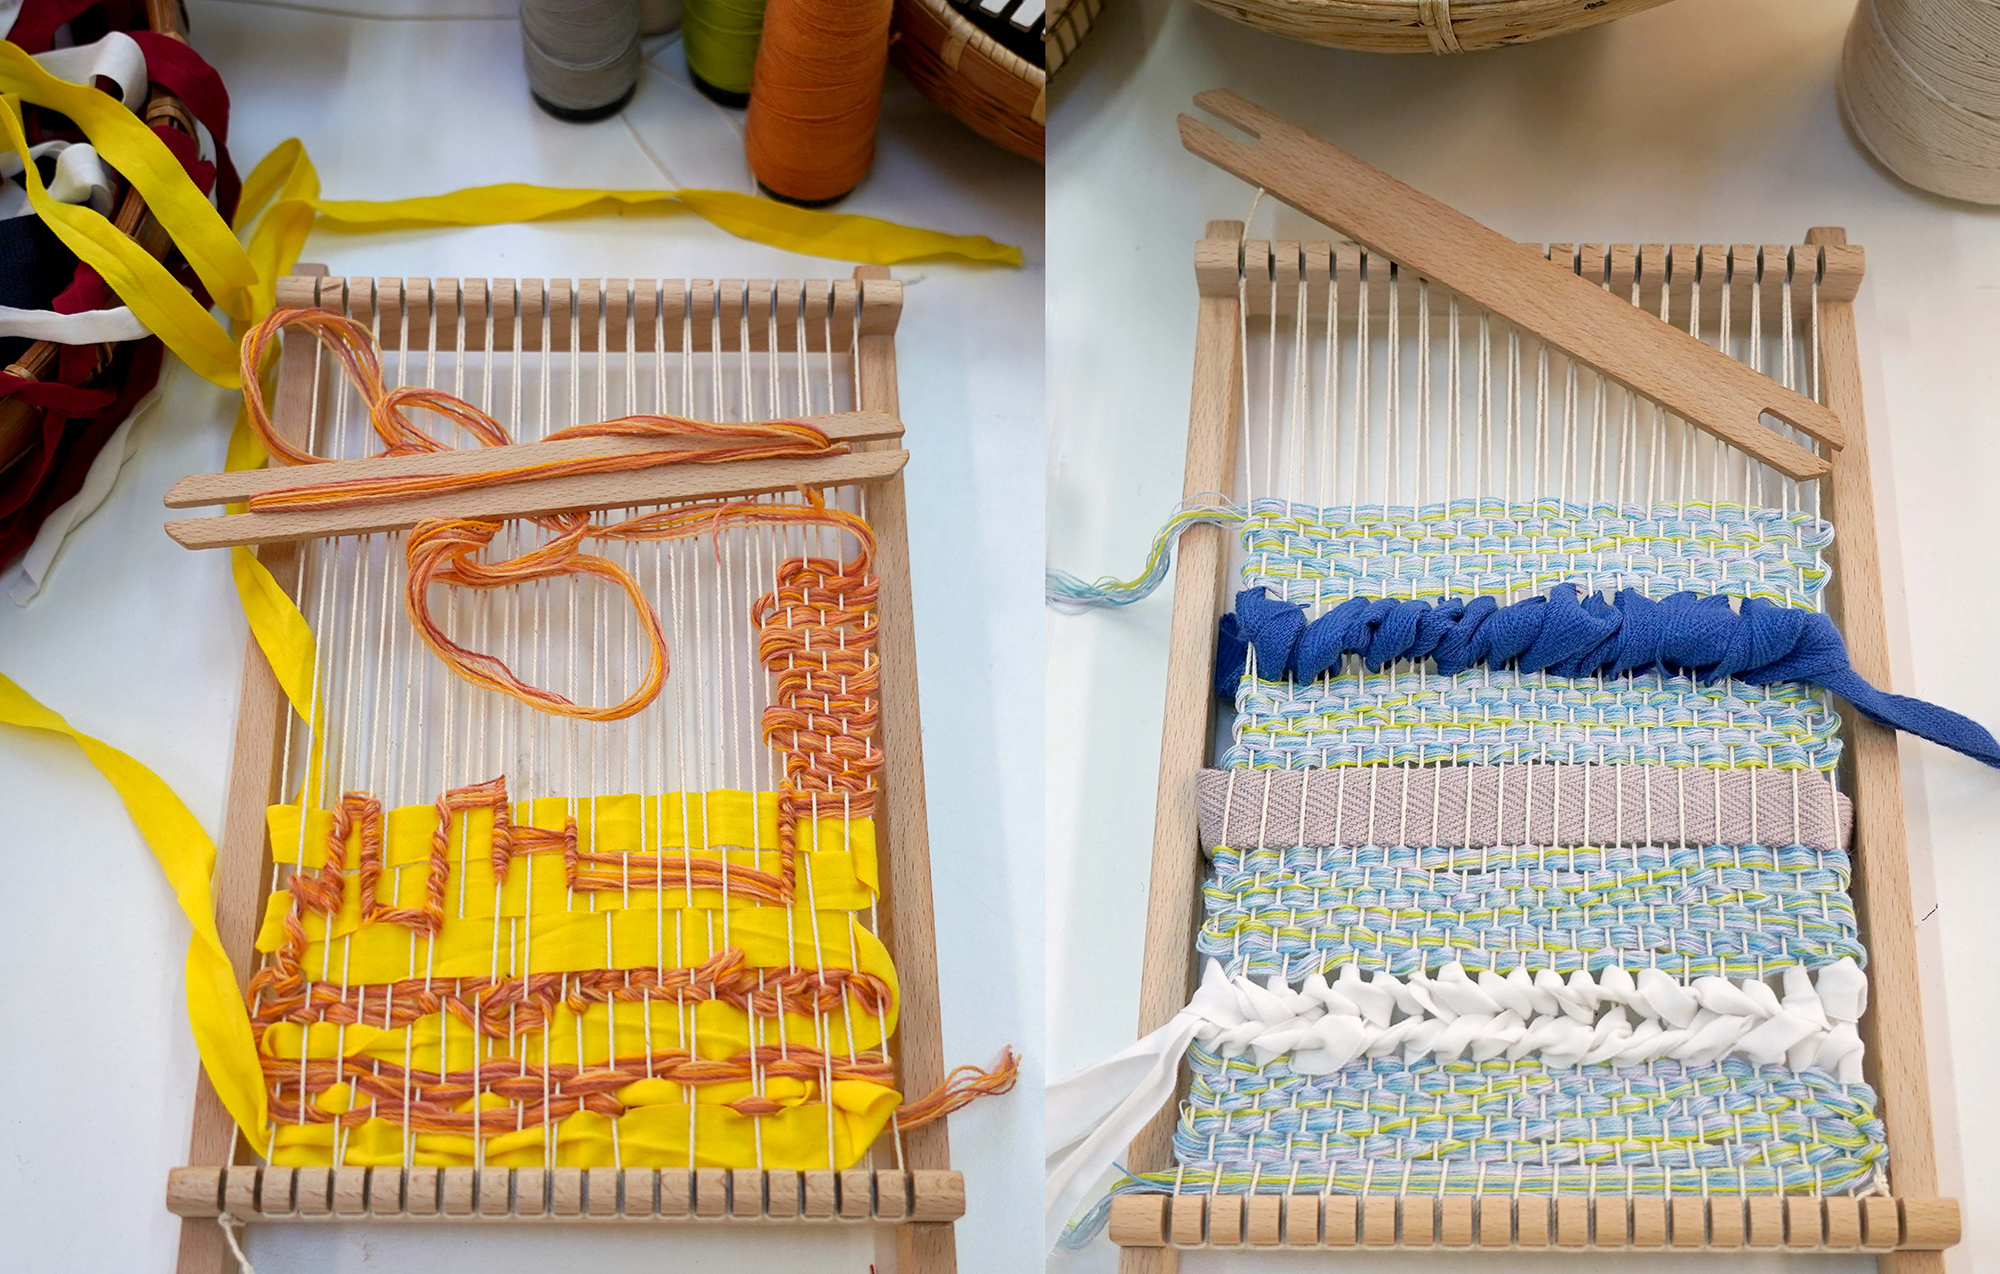 Weaving Play at the ATW